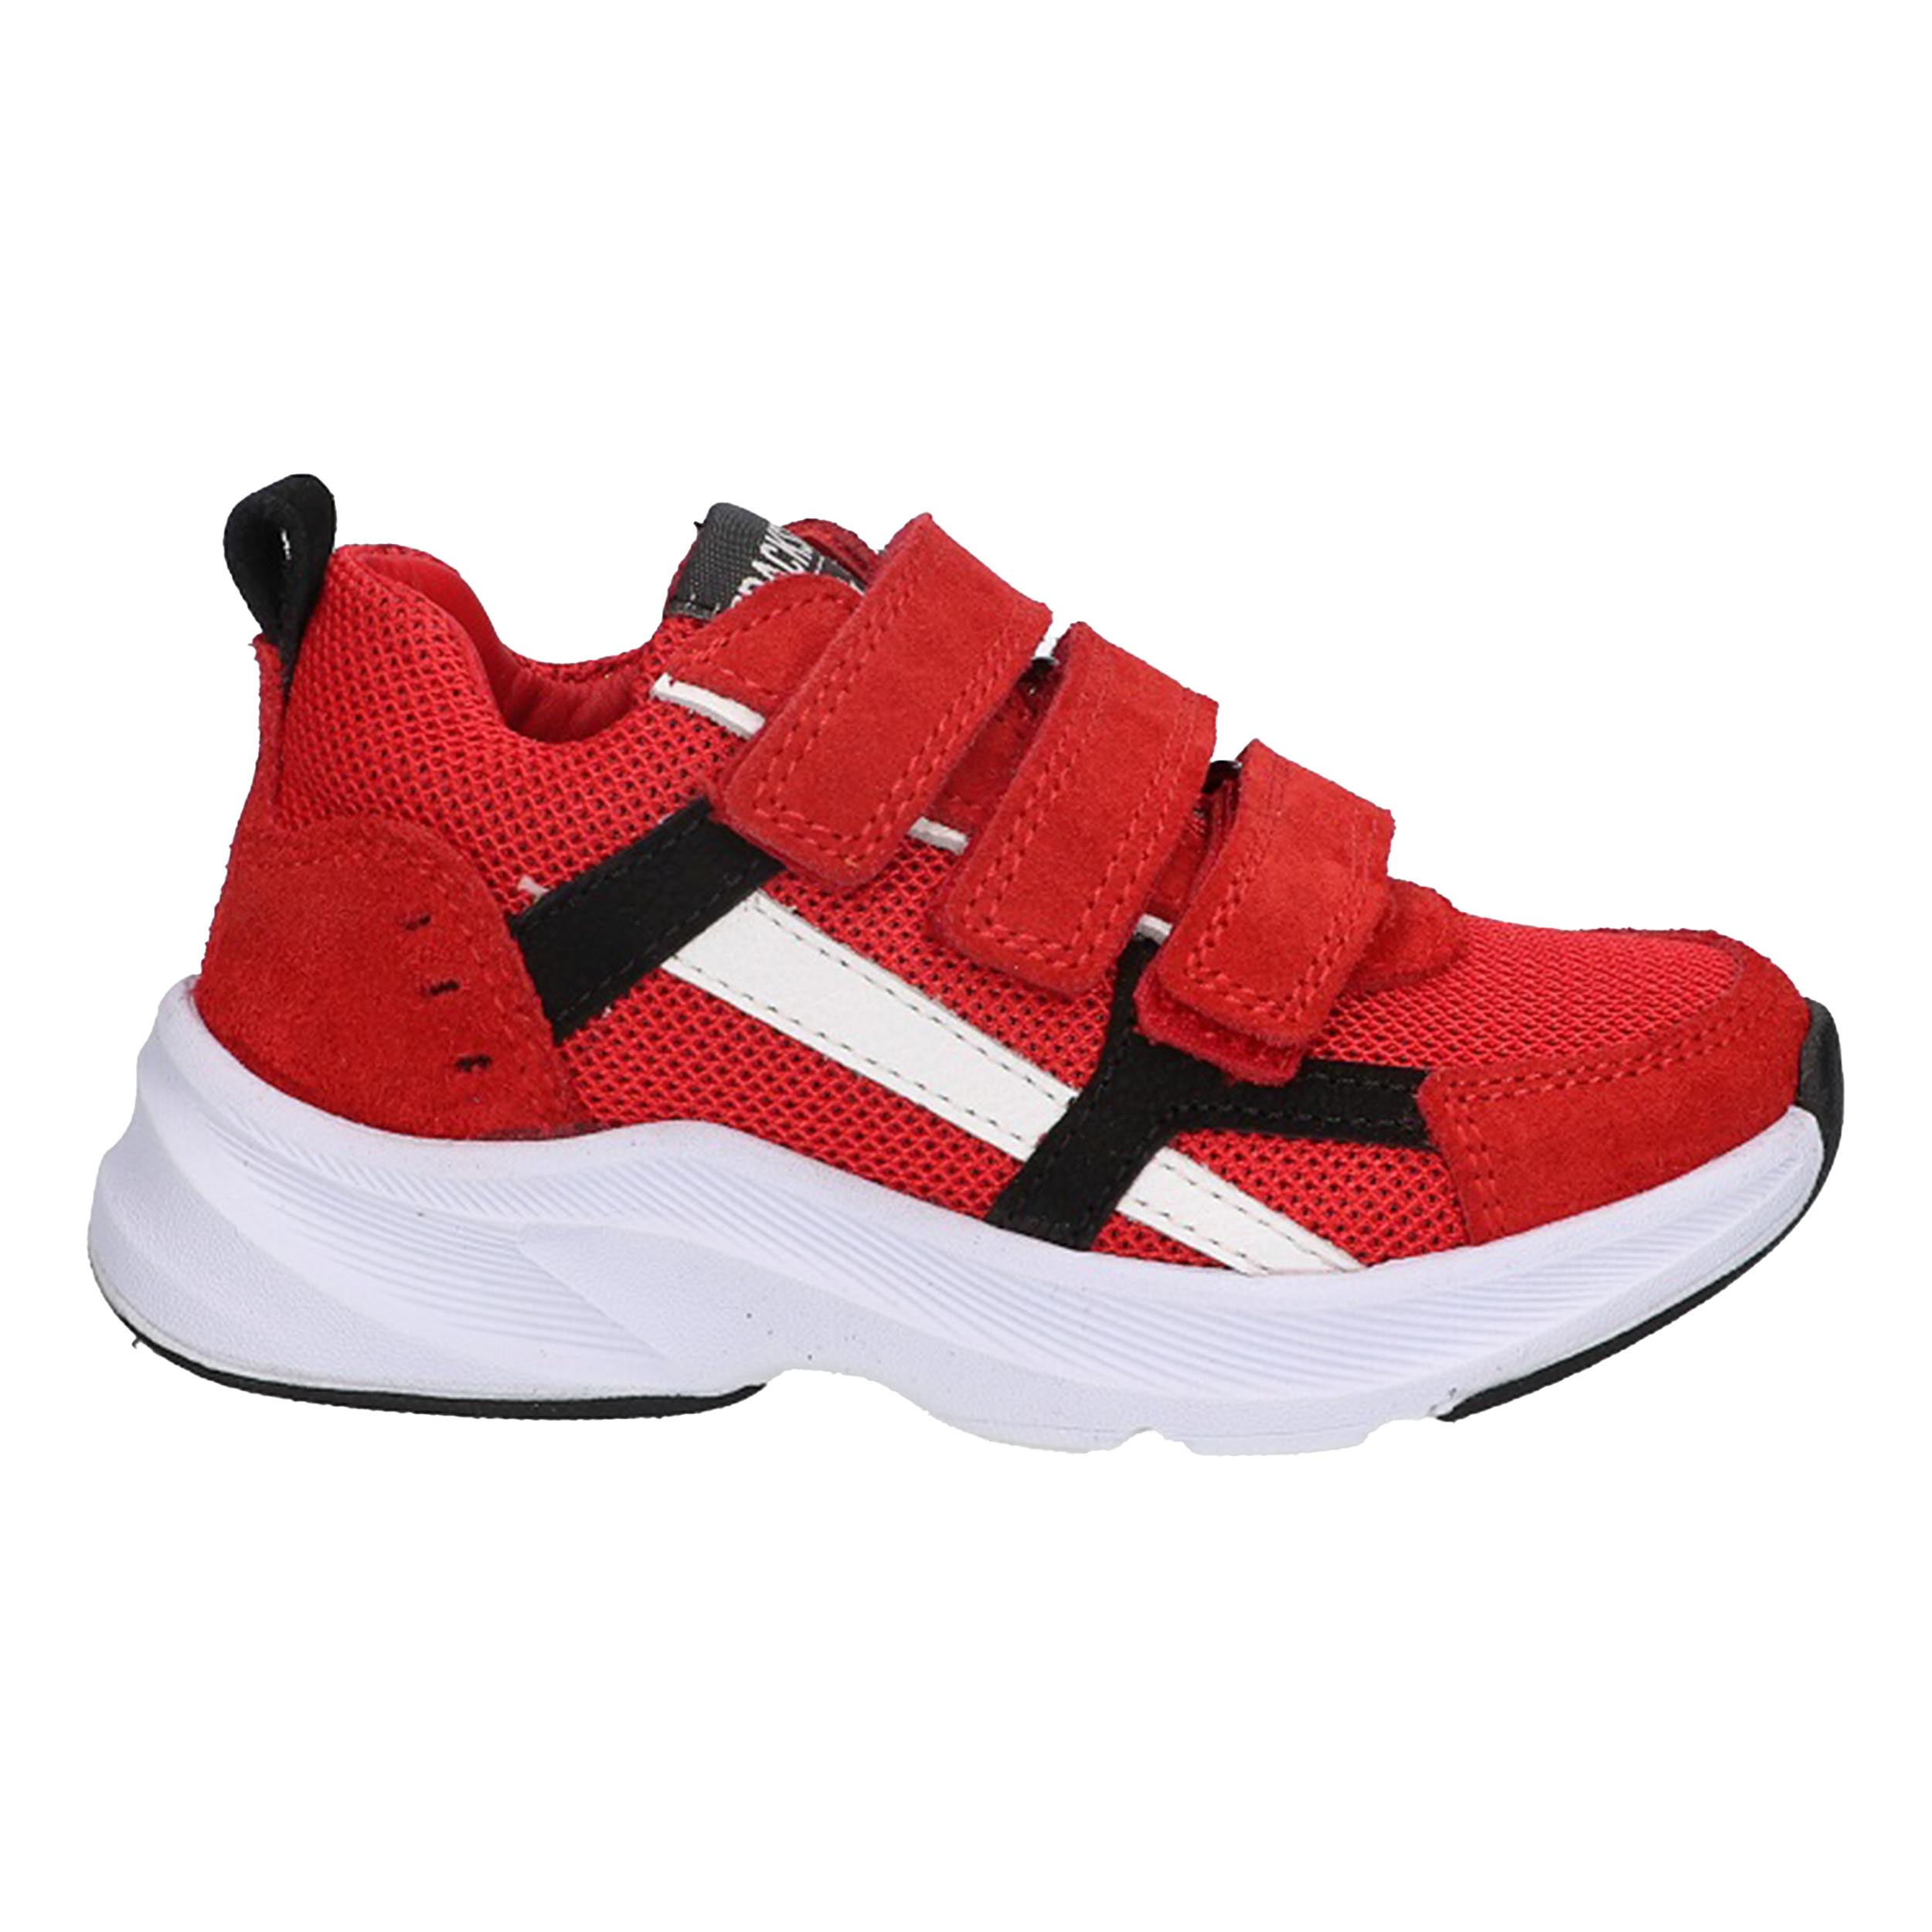 Trackstyle 324335 Sneaker Ian Icoon Red 3.5